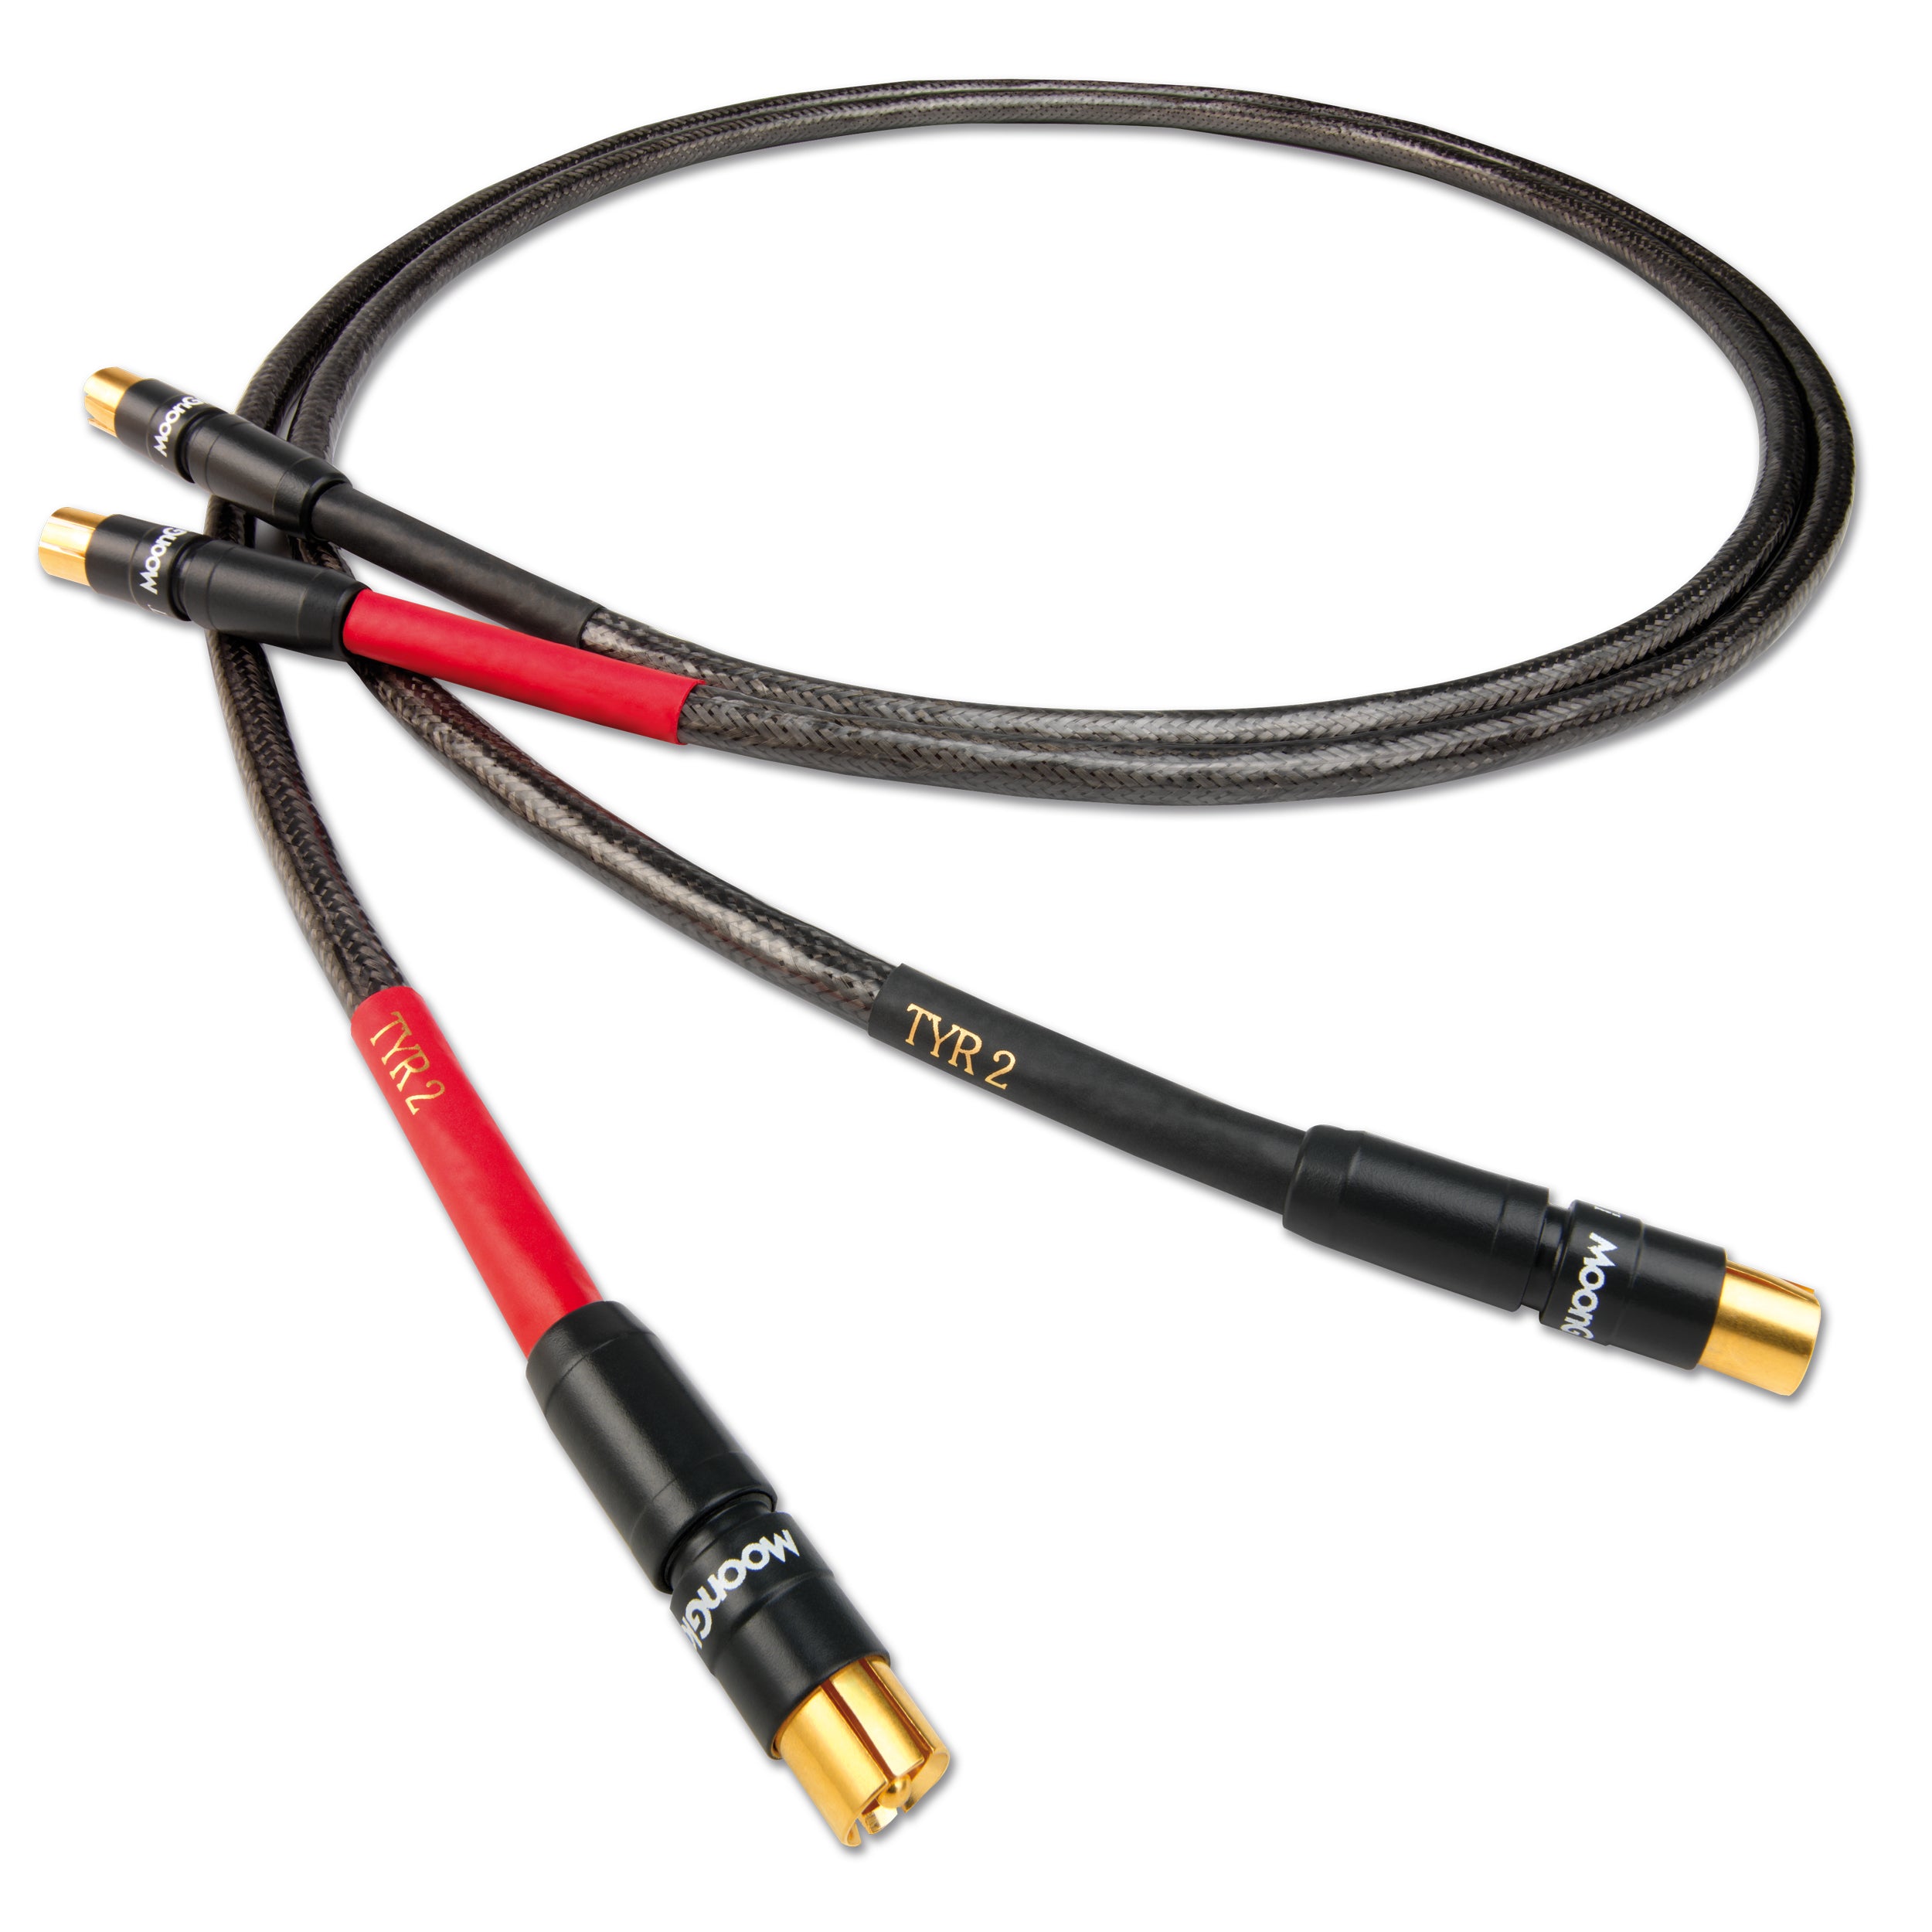 Nordost TYR 2 Interconnect - Sold as a Pair